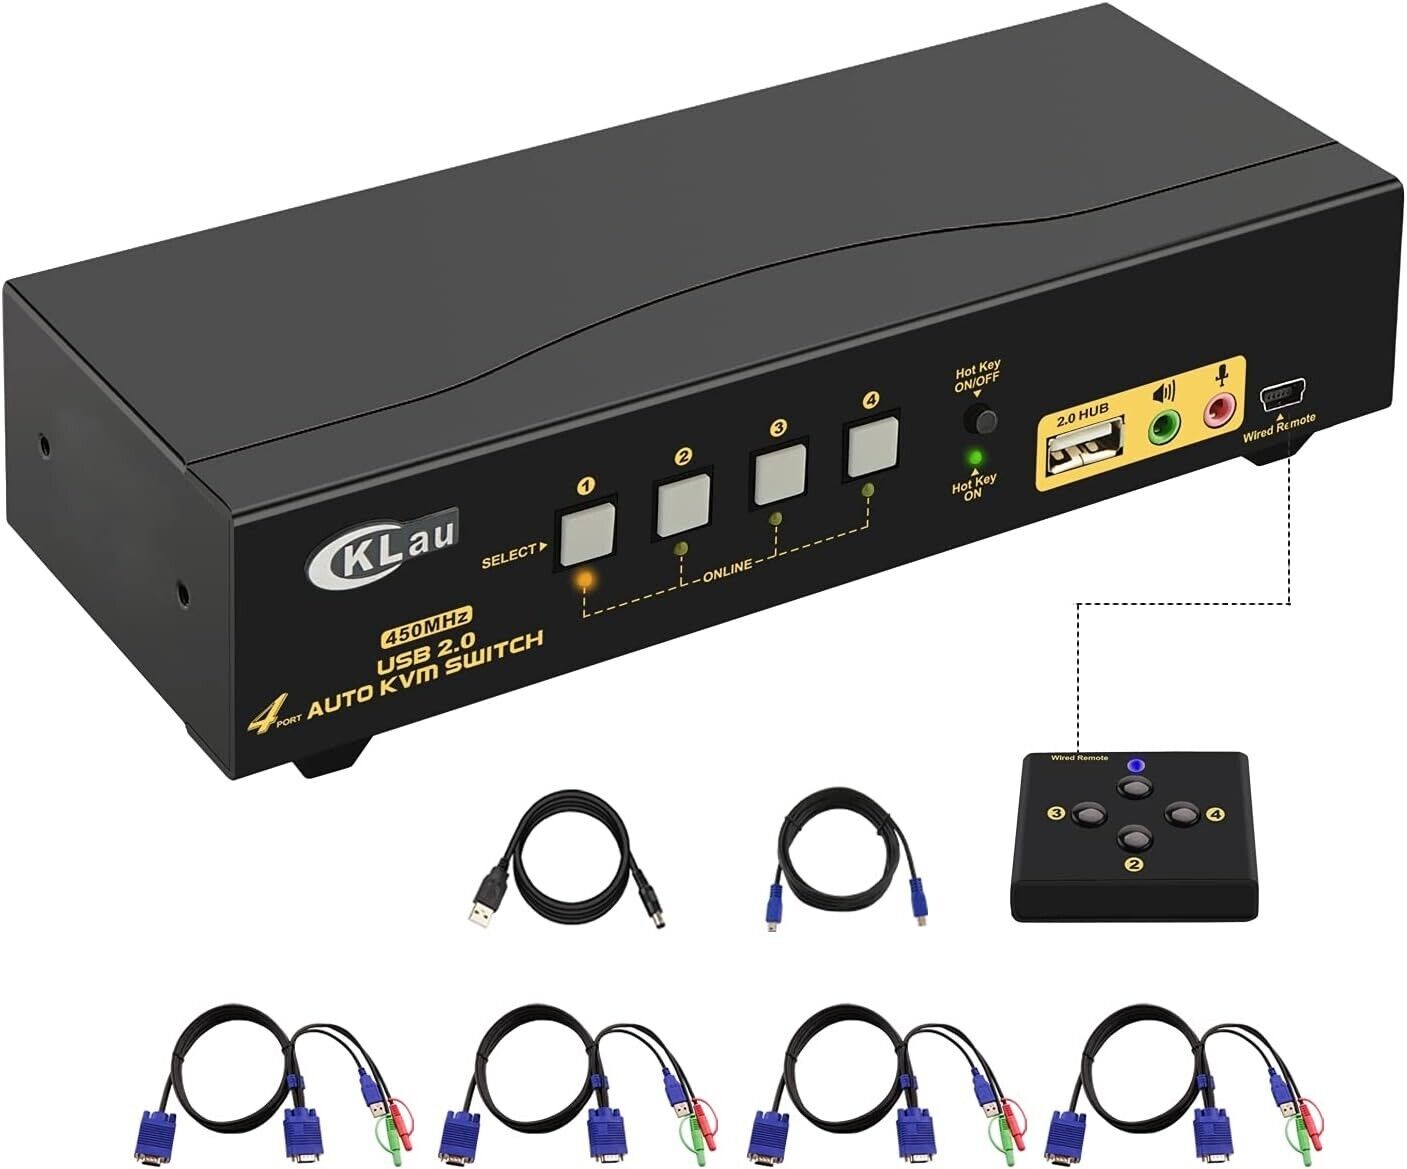 CKLau 4 Port 450MHz USB Auto VGA KVM Switch with Audio and Cables, Monitor Switc